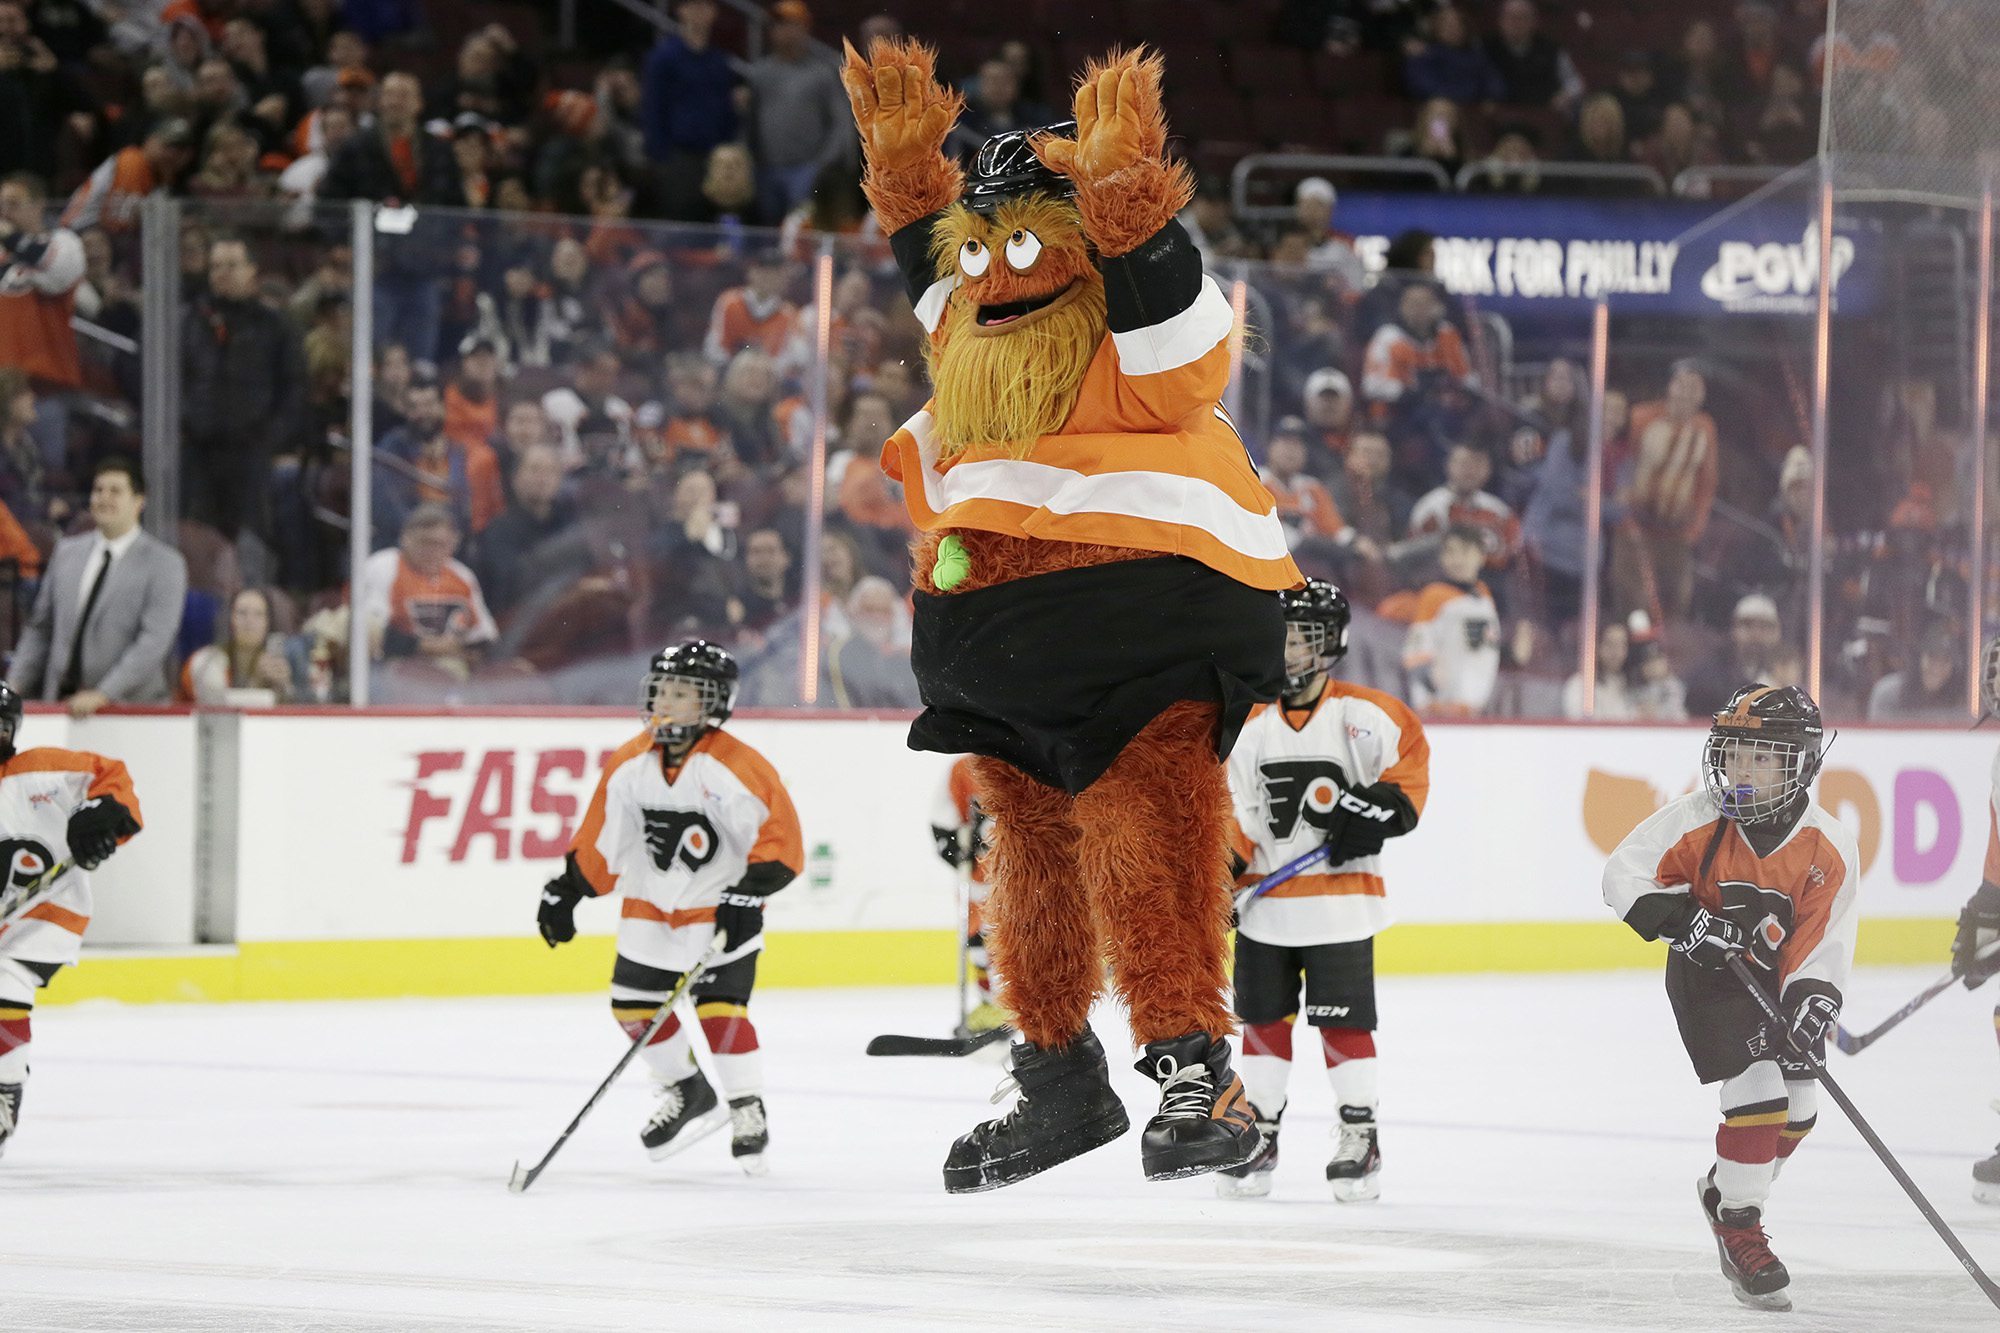 Philadelphia Flyers mascot Gritty accused of punching 13-year-old fan